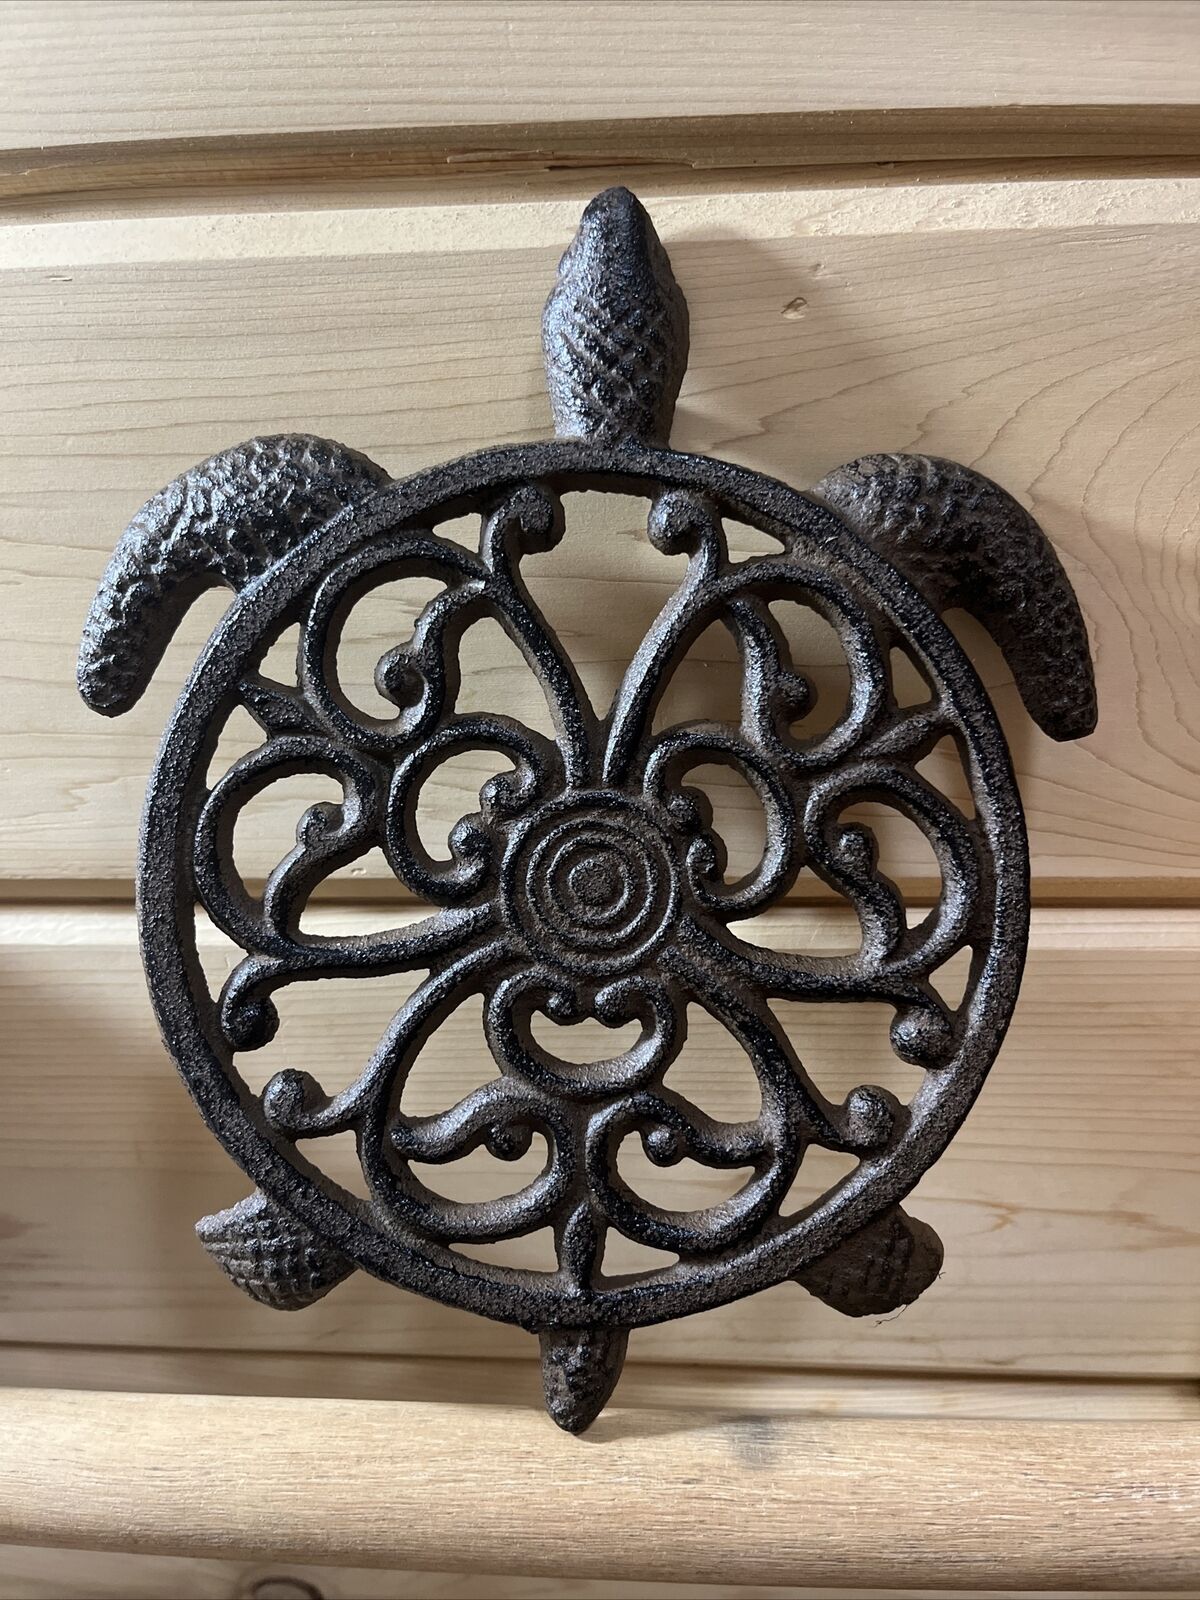 NEW Cast Iron Sea Turtle Trivet With A Decorative Design For Hot Pans And Pots